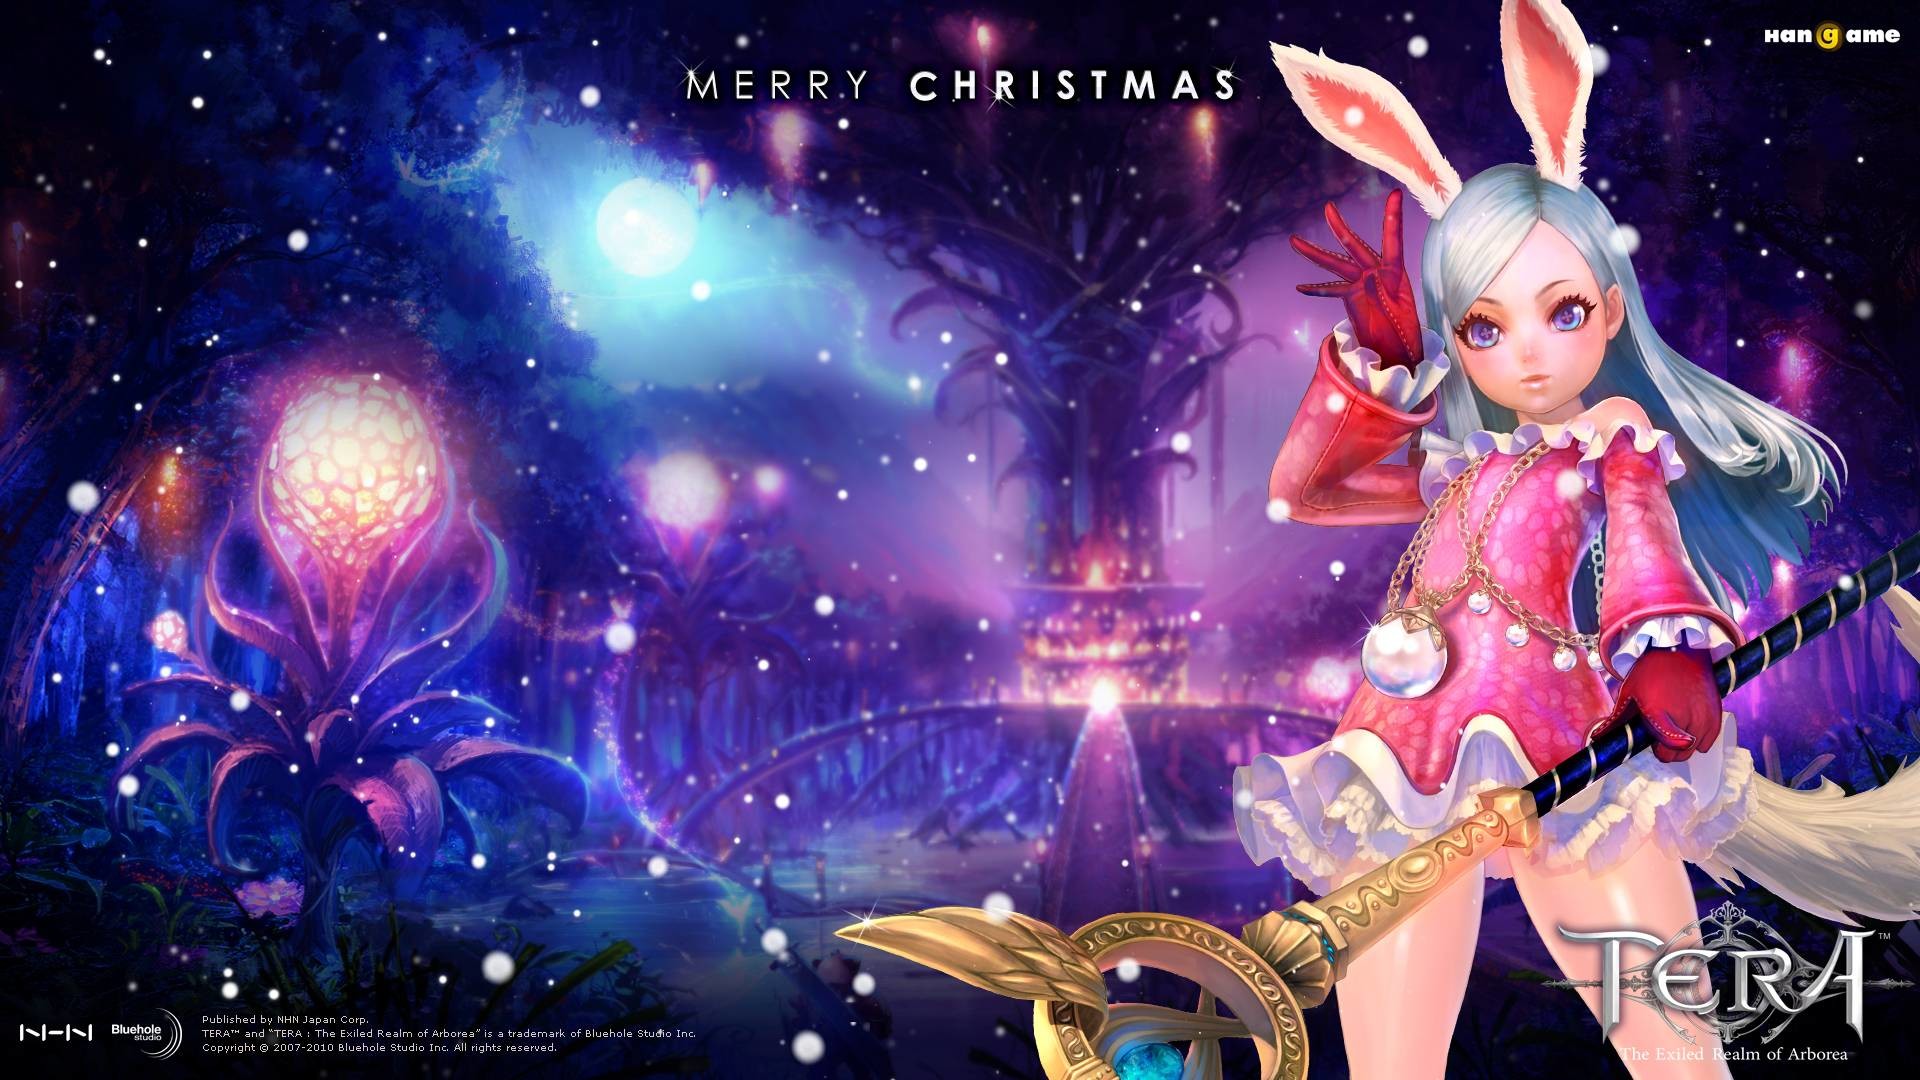 Tera(JP): Four Christmas Wallpapers Released